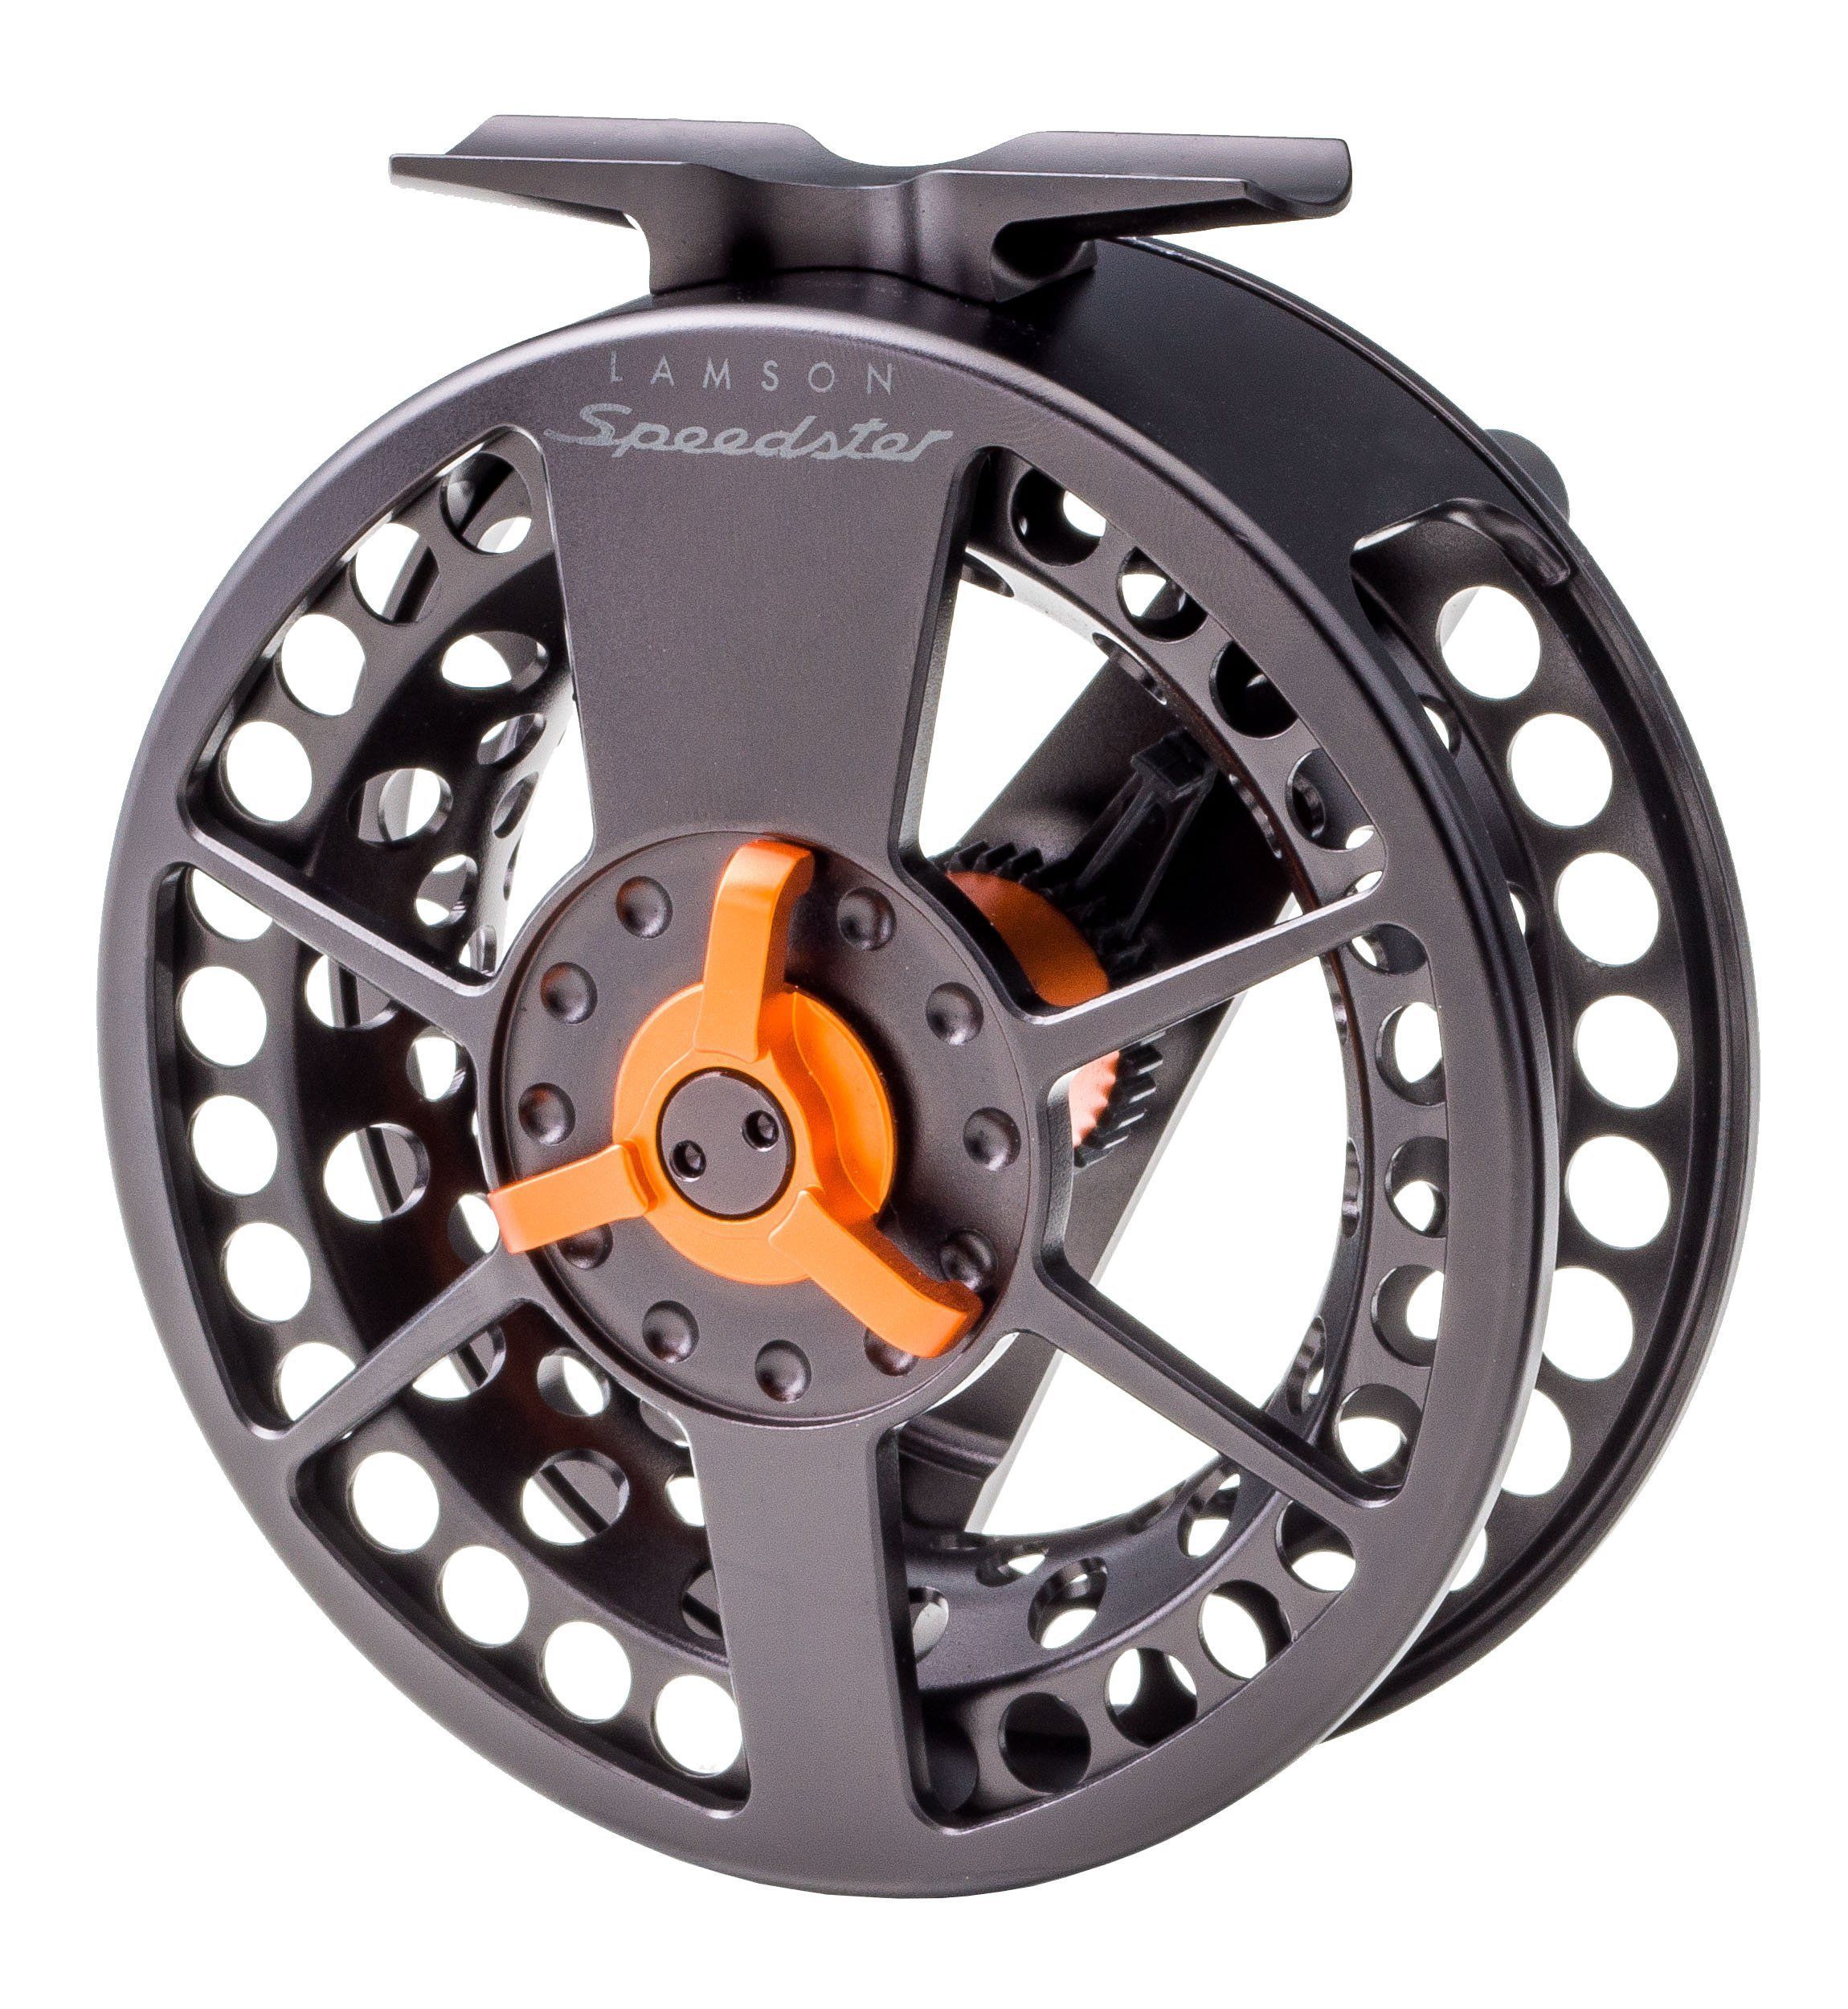 Lamson Speedster S-Series Fly Fishing Reel Product Details